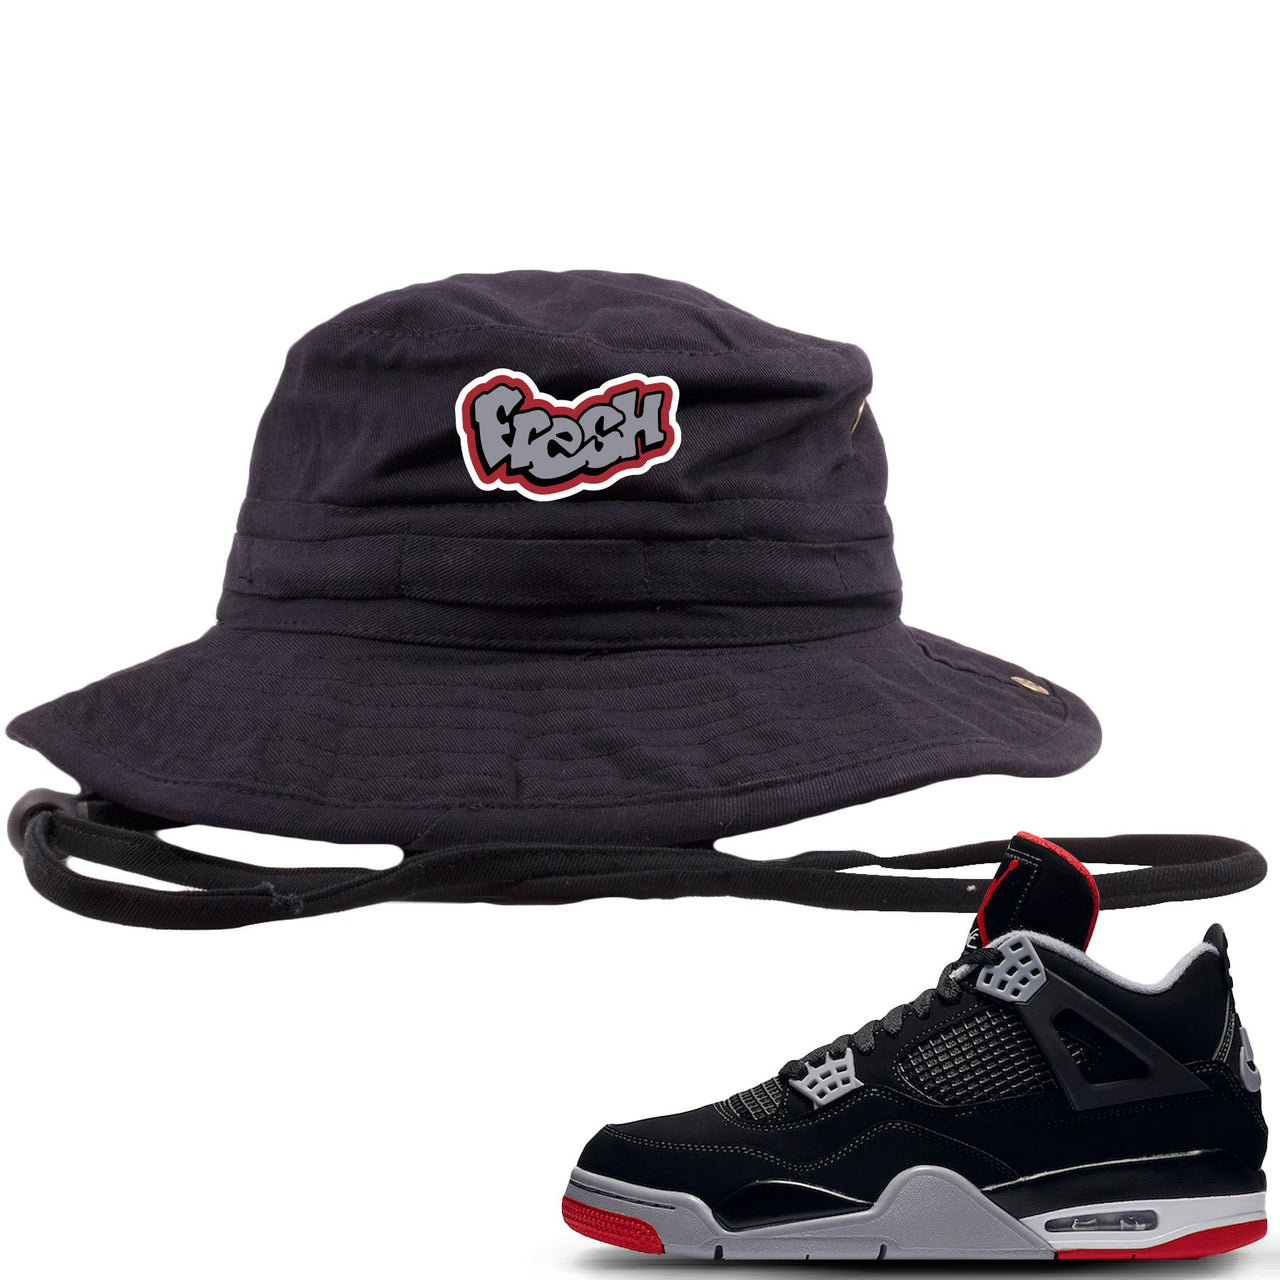 This black and grey bucket hat will match great with you Air Jordan 4 Bred shoes